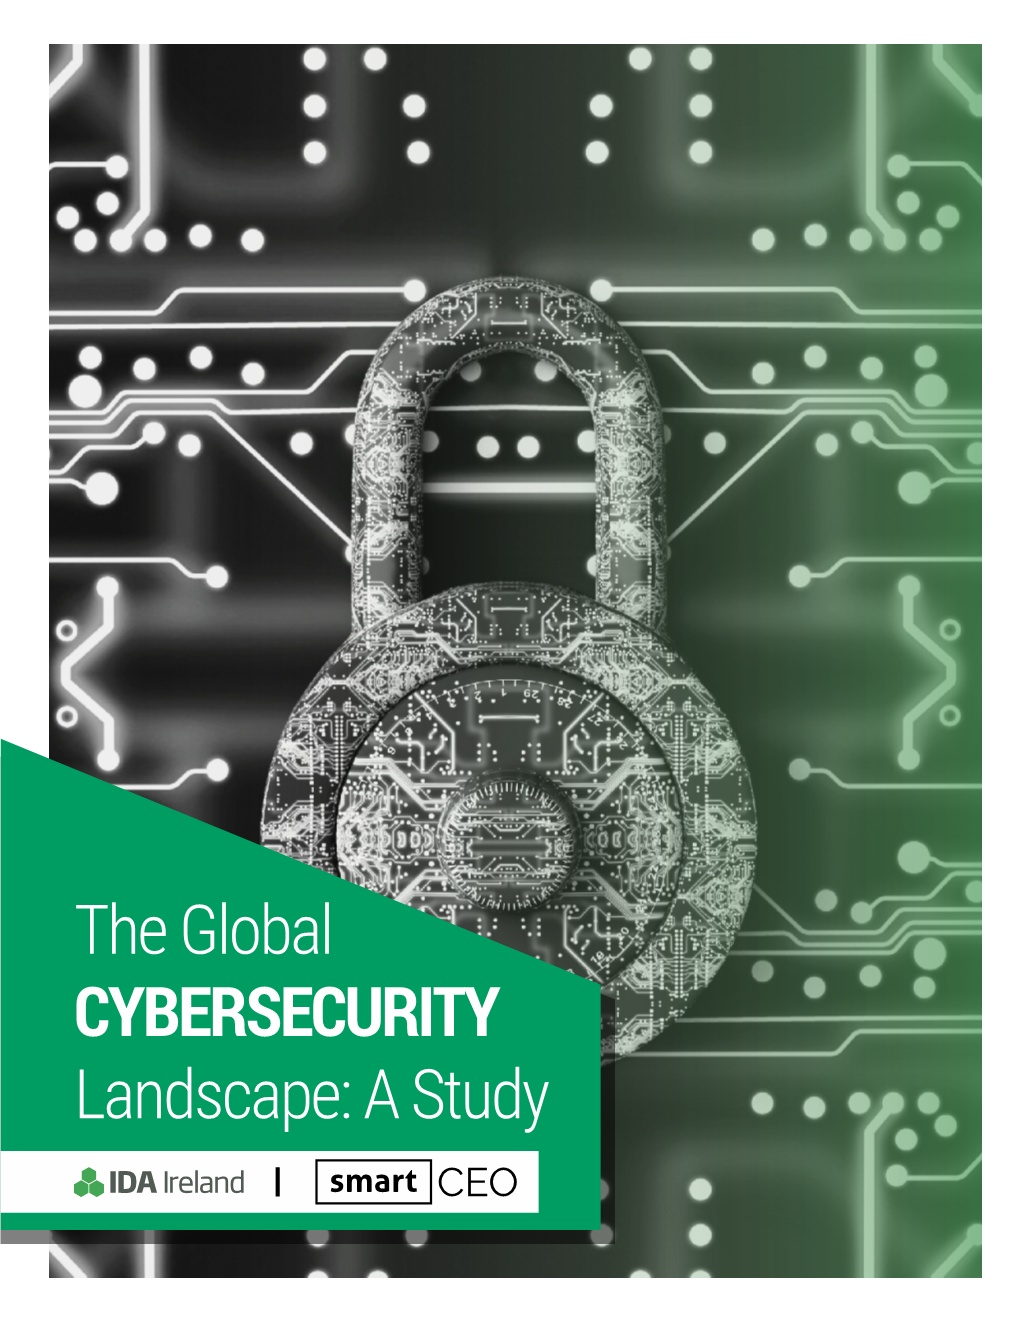 The Global CYBERSECURITY Landscape: a Study